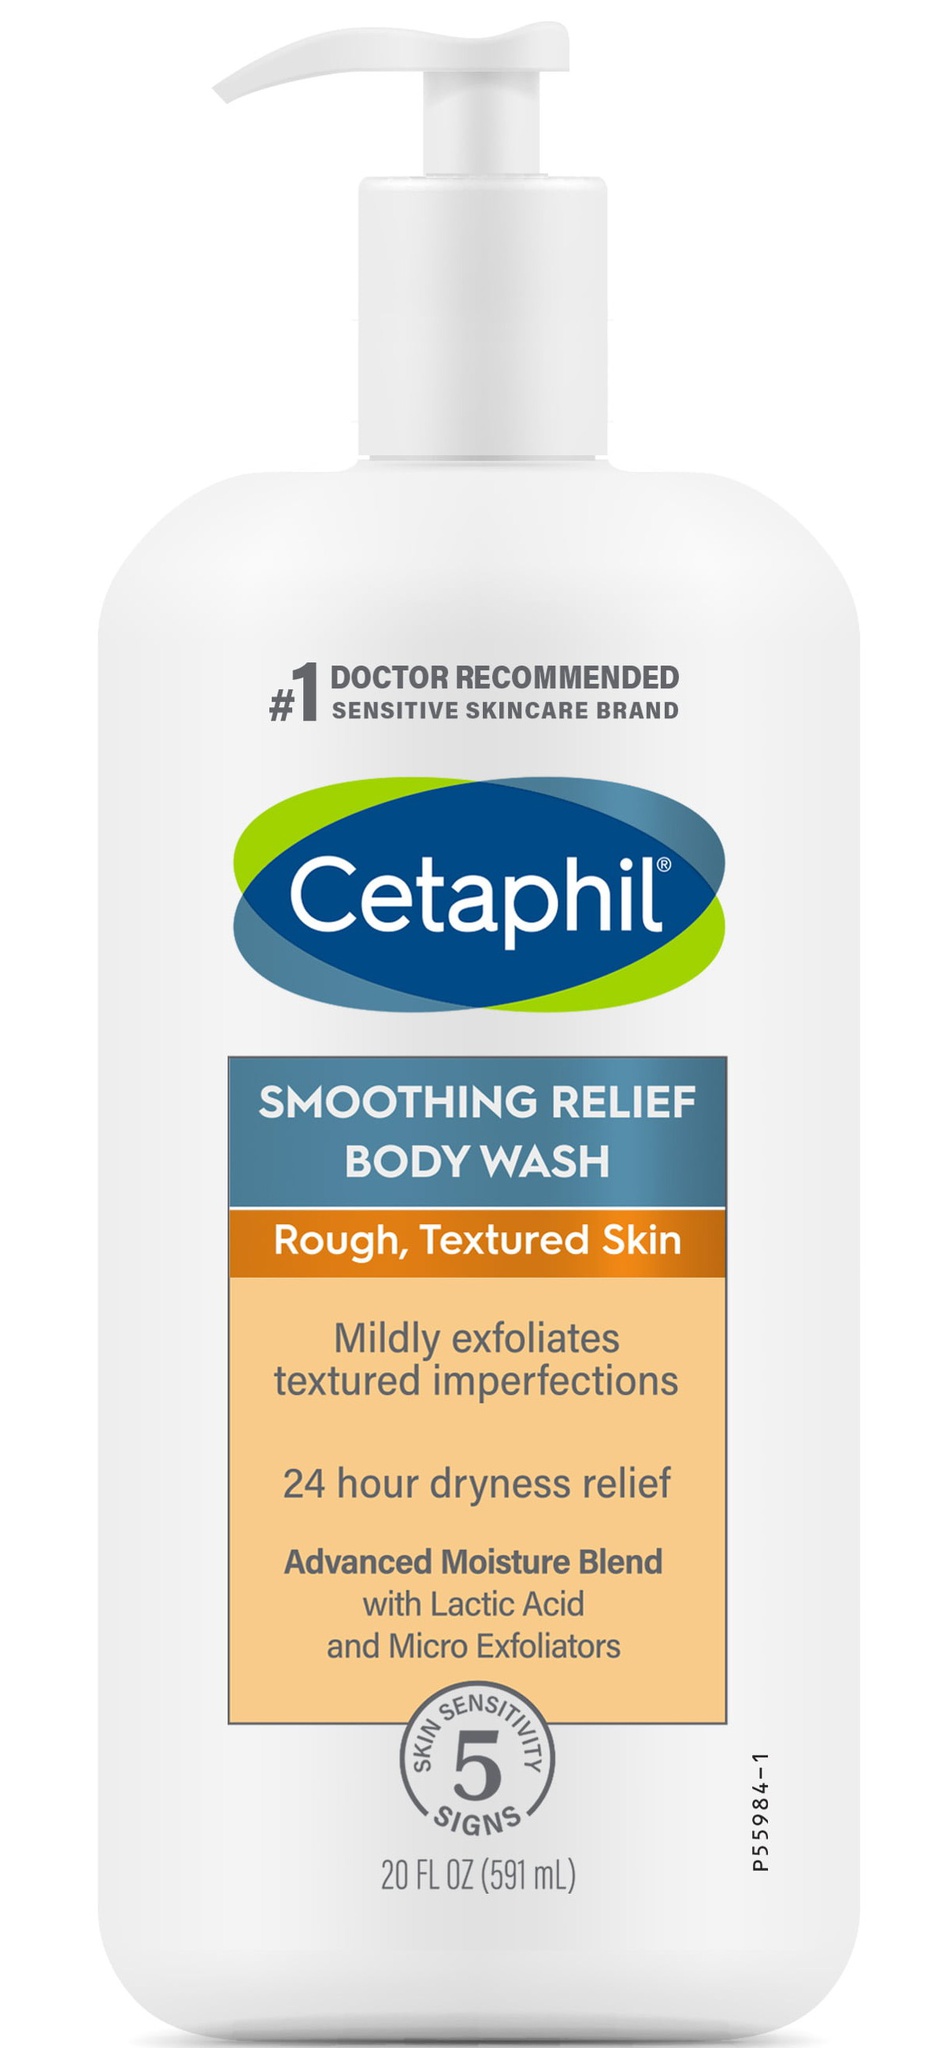 Cetaphil Smoothing Relief Body Wash